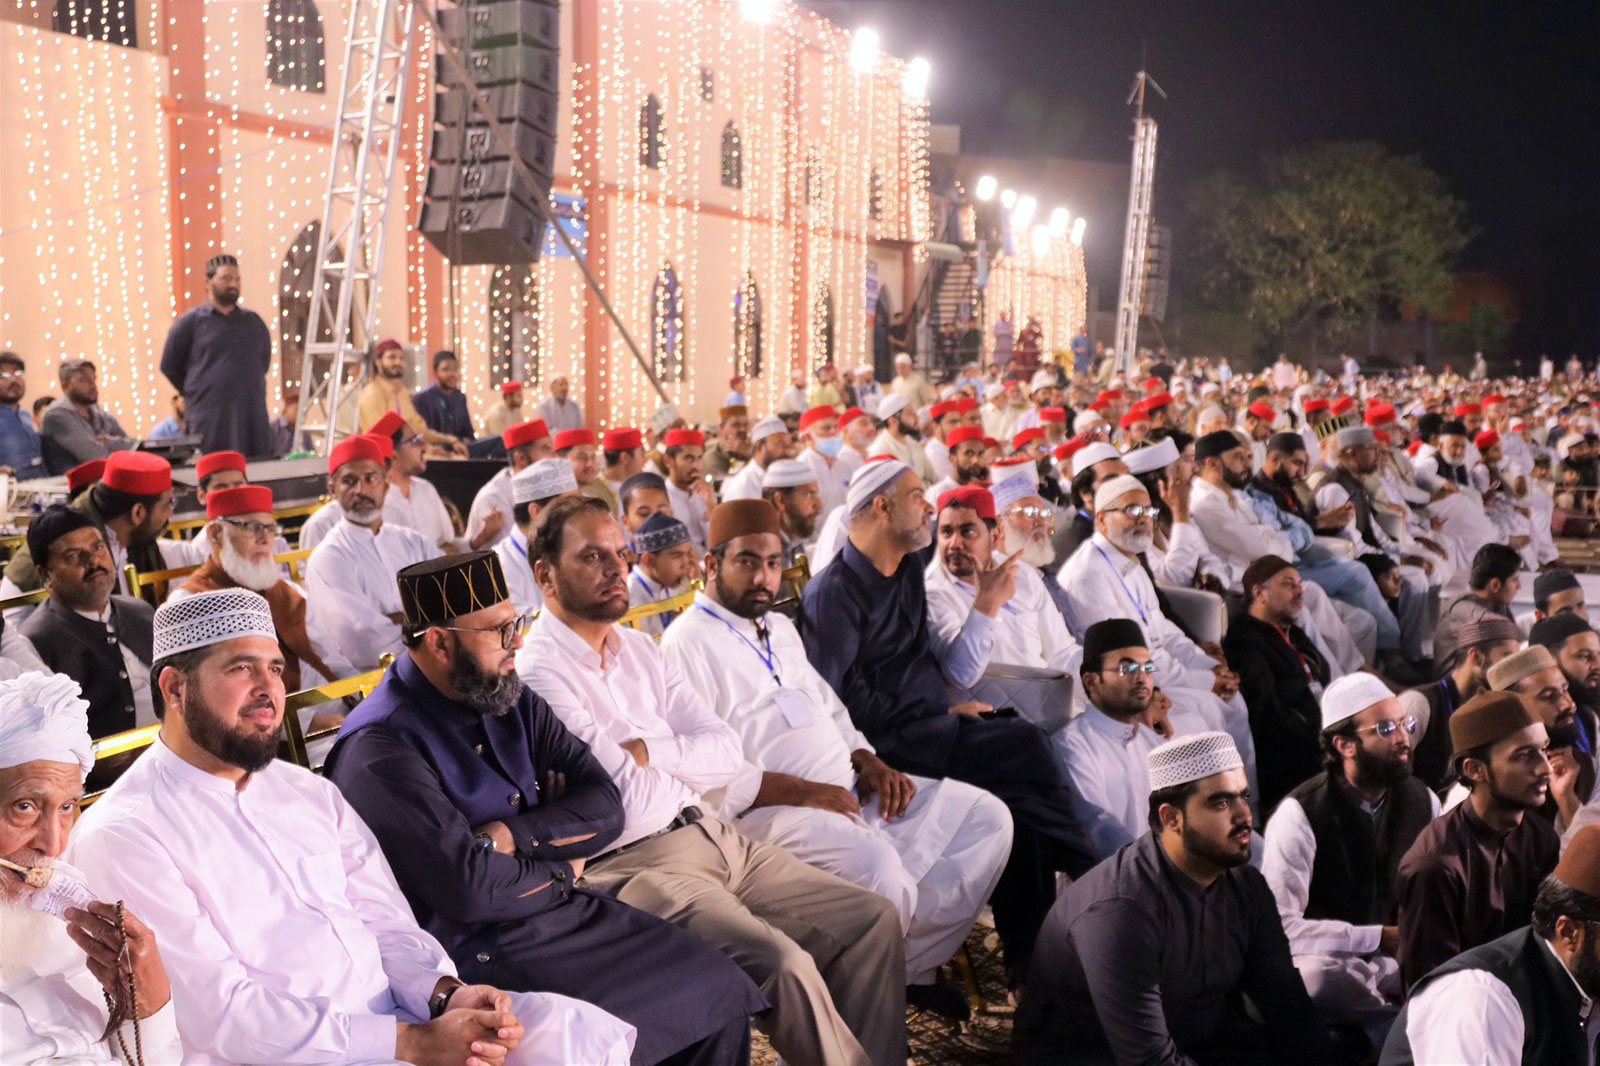 Dr Tahir ul Qadri delivers the final address on Why Believe in God and Why Follow Religion at Itikaf City 2024